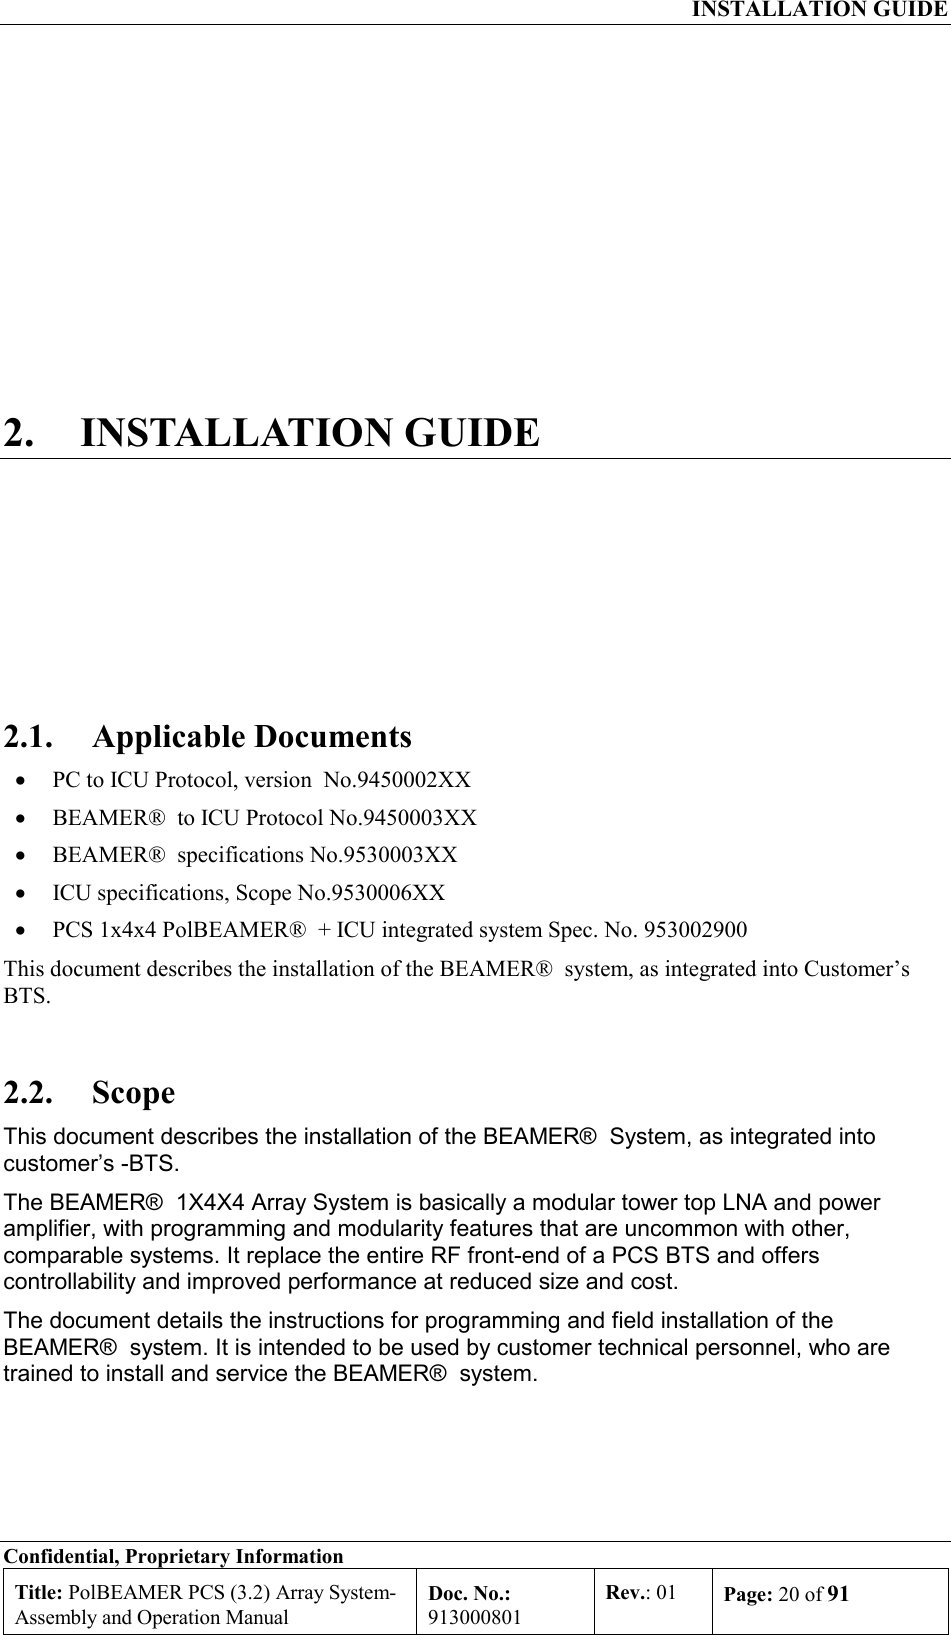  INSTALLATION GUIDE Confidential, Proprietary Information Title: PolBEAMER PCS (3.2) Array System- Assembly and Operation Manual Doc. No.: 913000801 Rev.: 01  Page: 20 of 91  2. INSTALLATION GUIDE 2.1. Applicable Documents •  PC to ICU Protocol, version  No.9450002XX •  BEAMER®  to ICU Protocol No.9450003XX •  BEAMER®  specifications No.9530003XX •  ICU specifications, Scope No.9530006XX •  PCS 1x4x4 PolBEAMER®  + ICU integrated system Spec. No. 953002900 This document describes the installation of the BEAMER®  system, as integrated into Customer’s BTS. 2.2. Scope This document describes the installation of the BEAMER®  System, as integrated into customer’s -BTS. The BEAMER®  1X4X4 Array System is basically a modular tower top LNA and power amplifier, with programming and modularity features that are uncommon with other, comparable systems. It replace the entire RF front-end of a PCS BTS and offers controllability and improved performance at reduced size and cost. The document details the instructions for programming and field installation of the BEAMER®  system. It is intended to be used by customer technical personnel, who are trained to install and service the BEAMER®  system. 